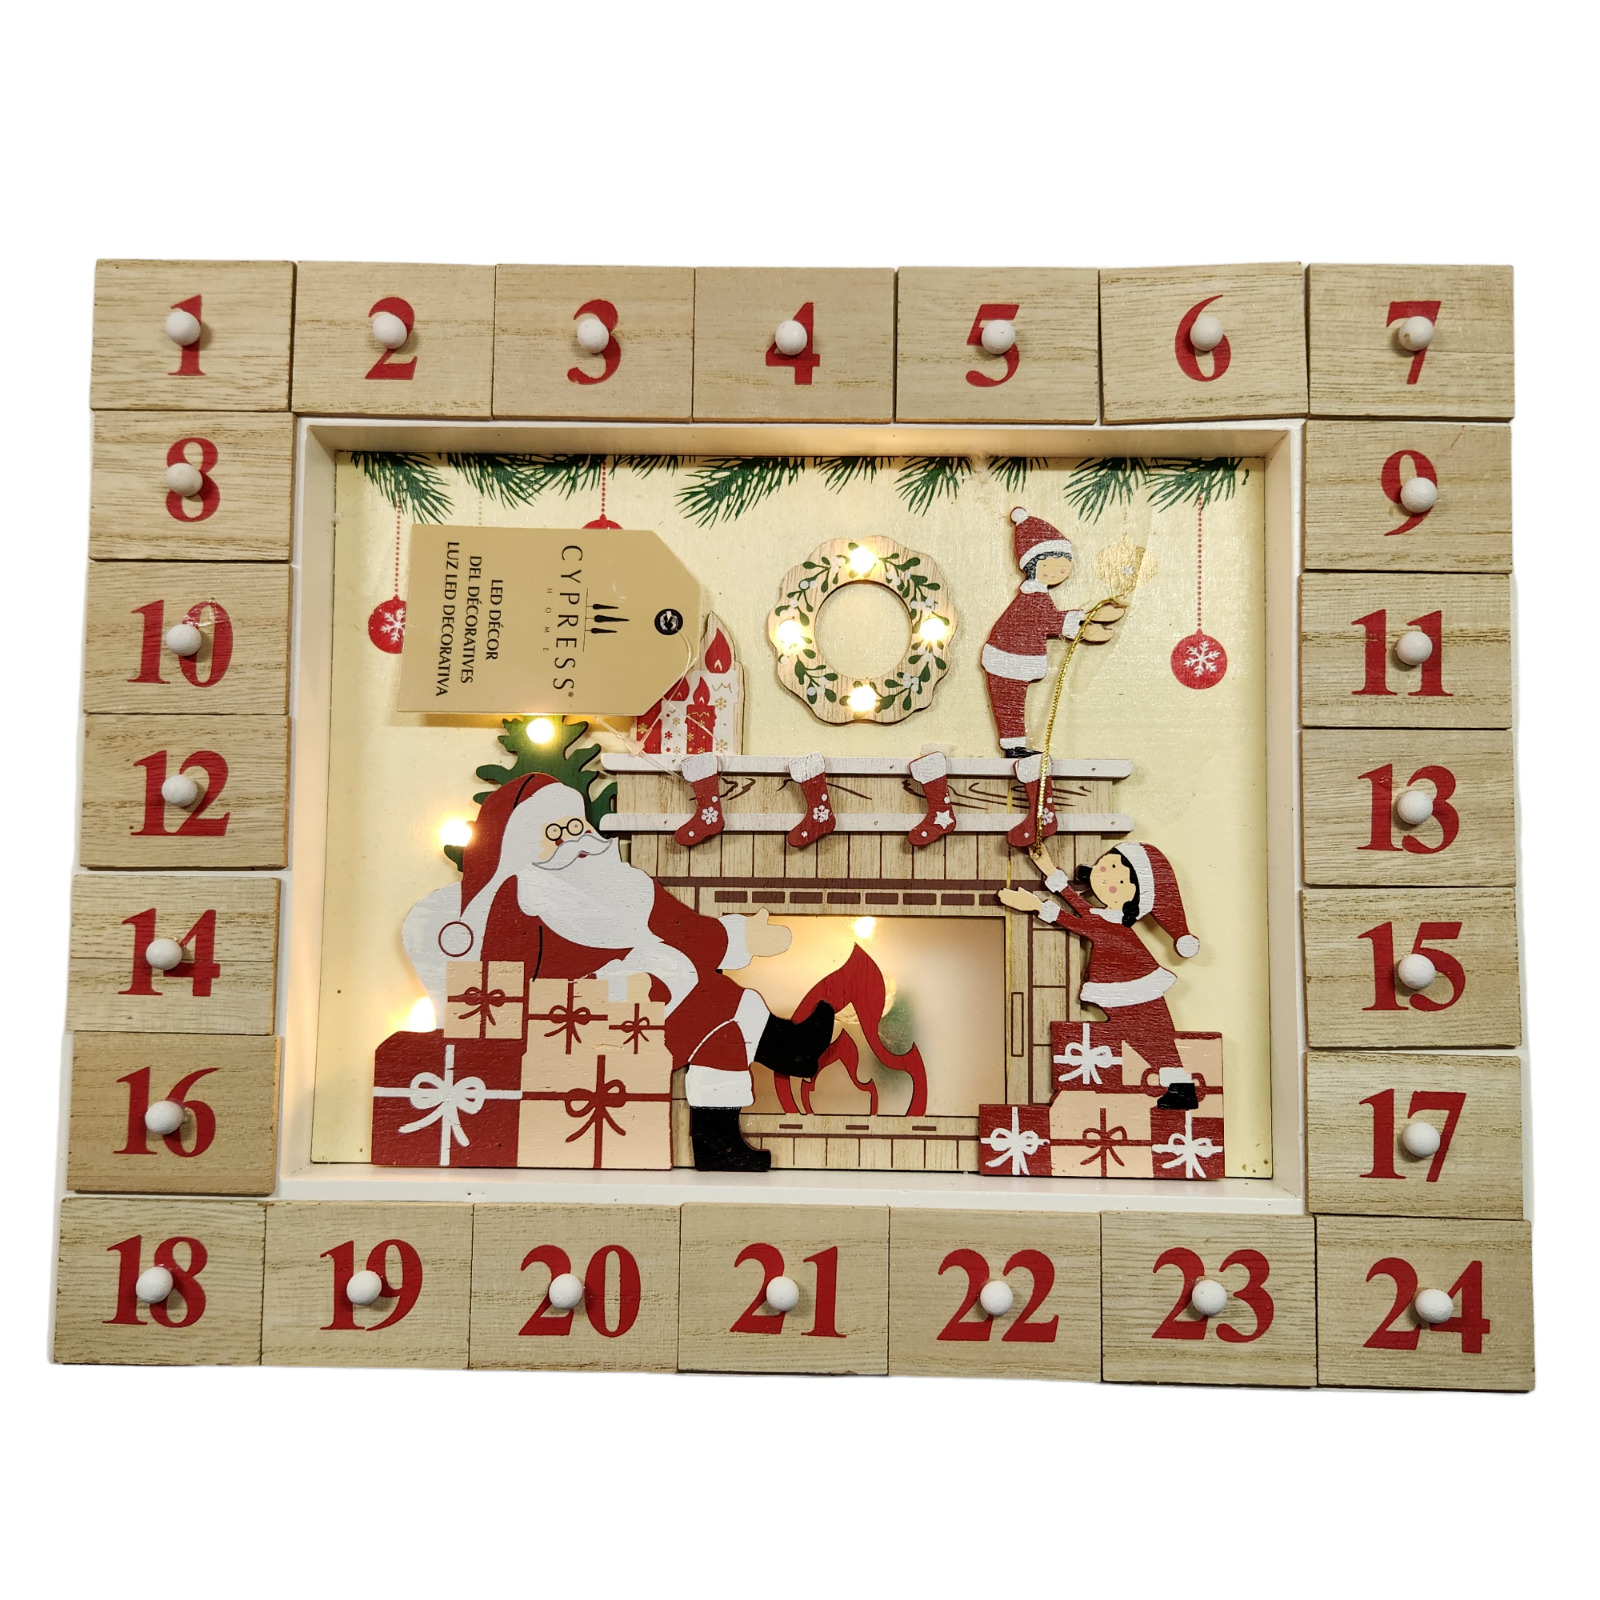 Cypress Home LED Christmas Wooden Advent Calendar Lights Up New With Tags